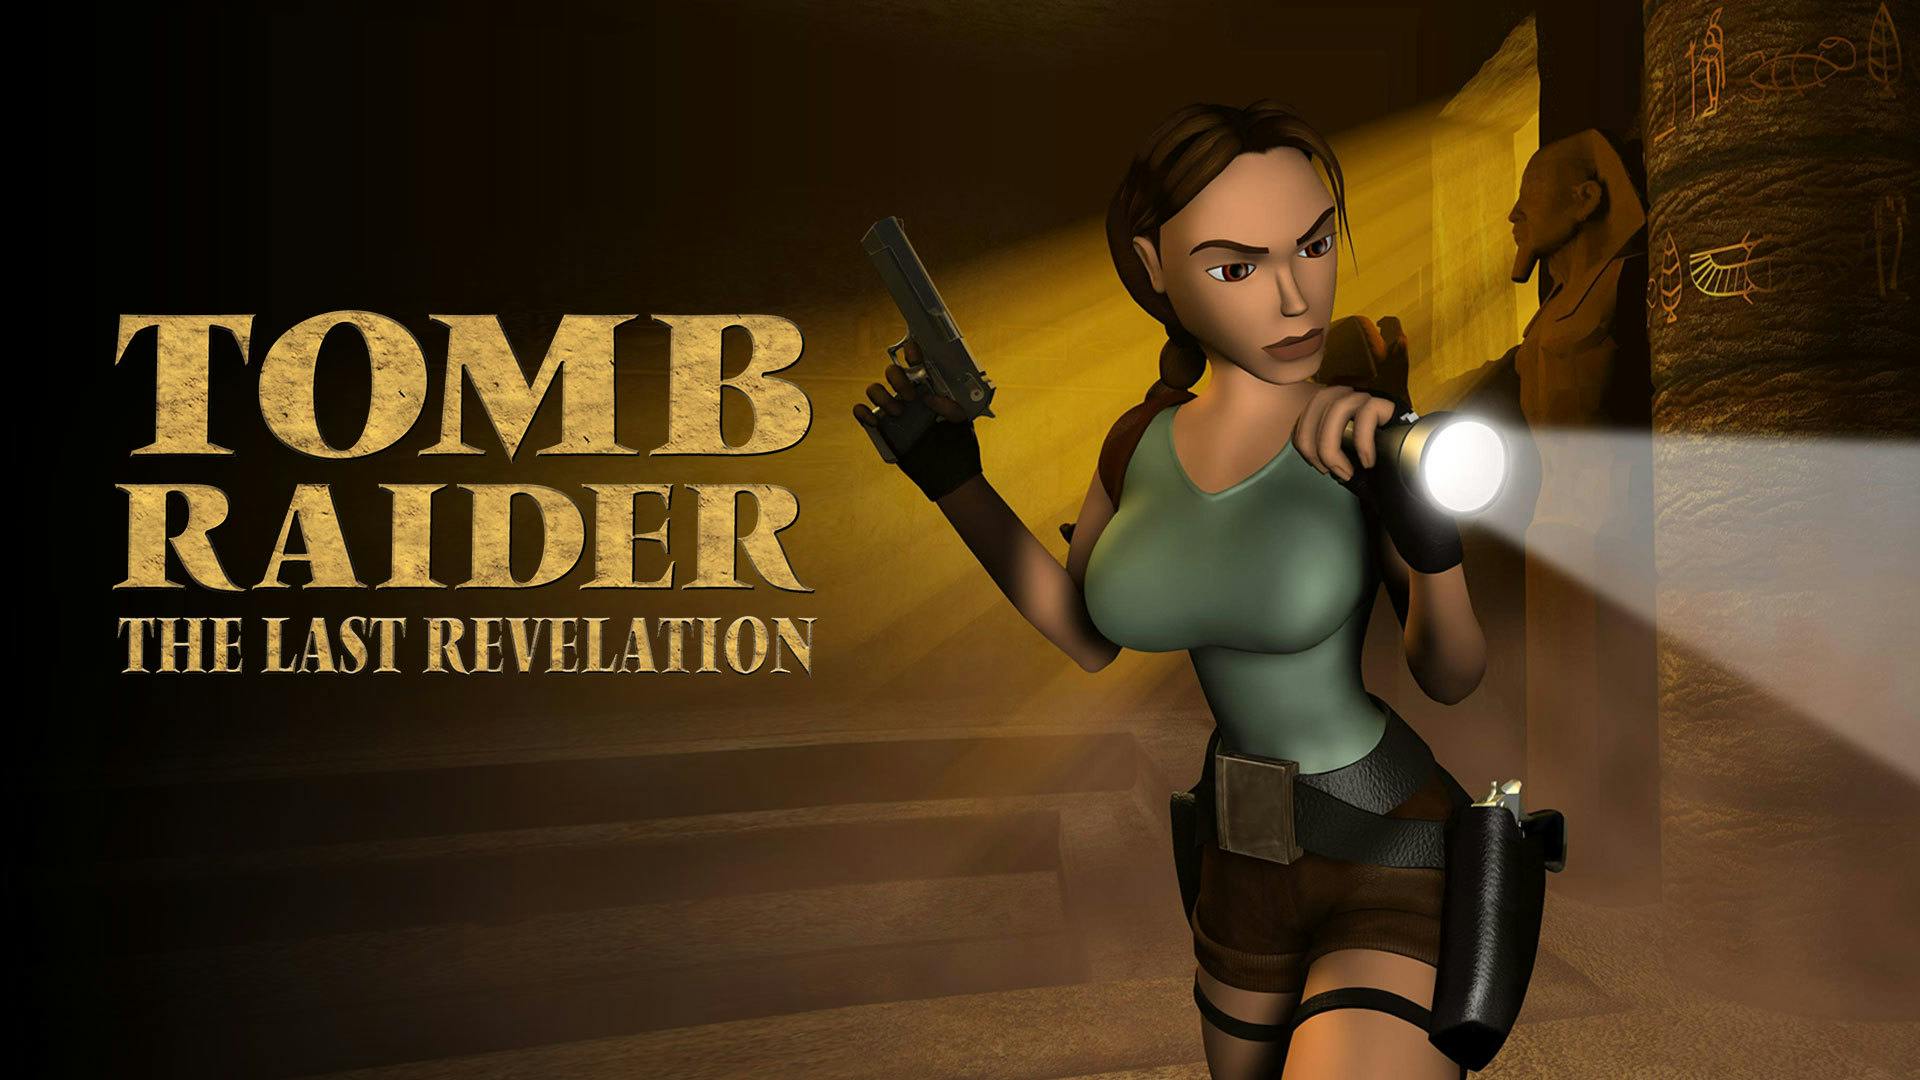 Tomb raider for steam фото 118